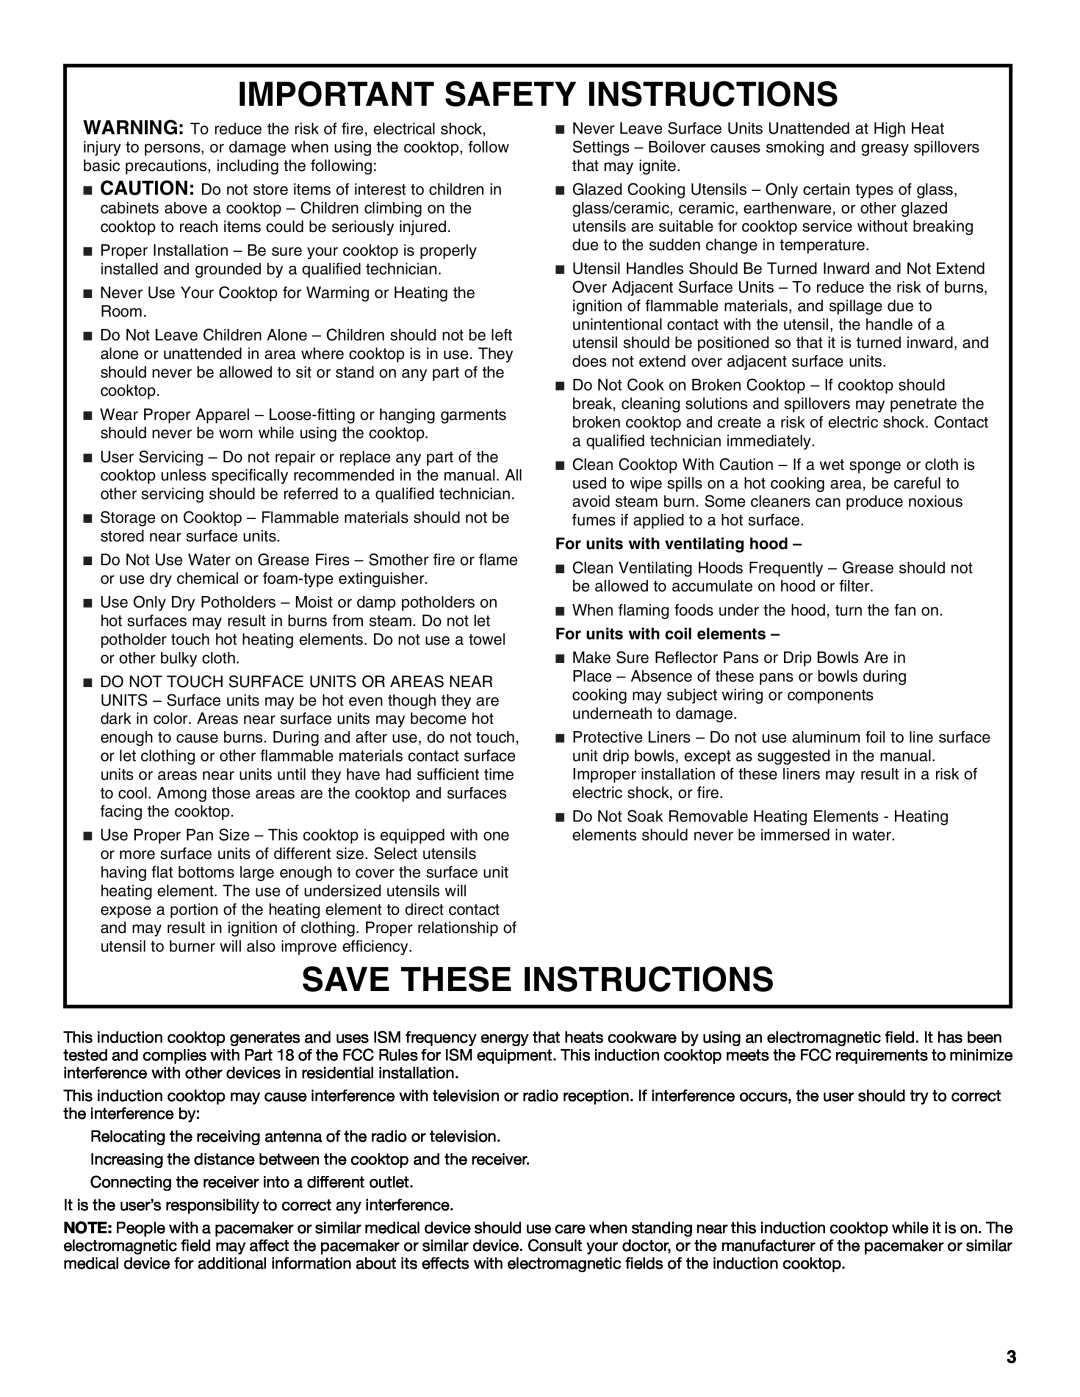 Whirlpool GCI3061XB manual Important Safety Instructions, Save These Instructions, For units with ventilating hood 